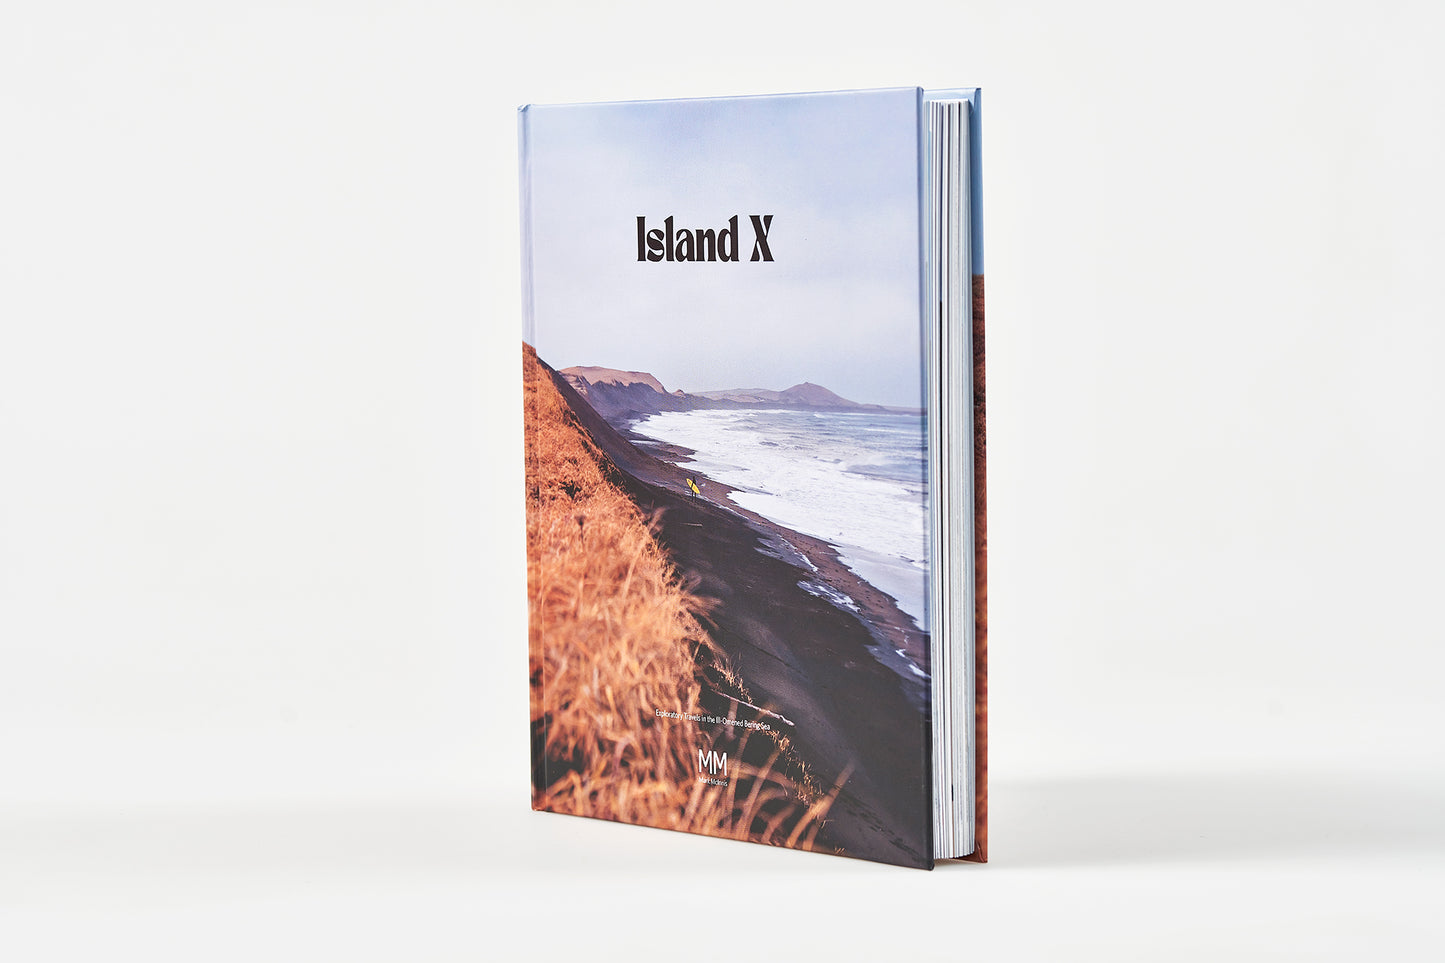 Island X- A photography book by Mark McInnis- Standard edition front cover upright.